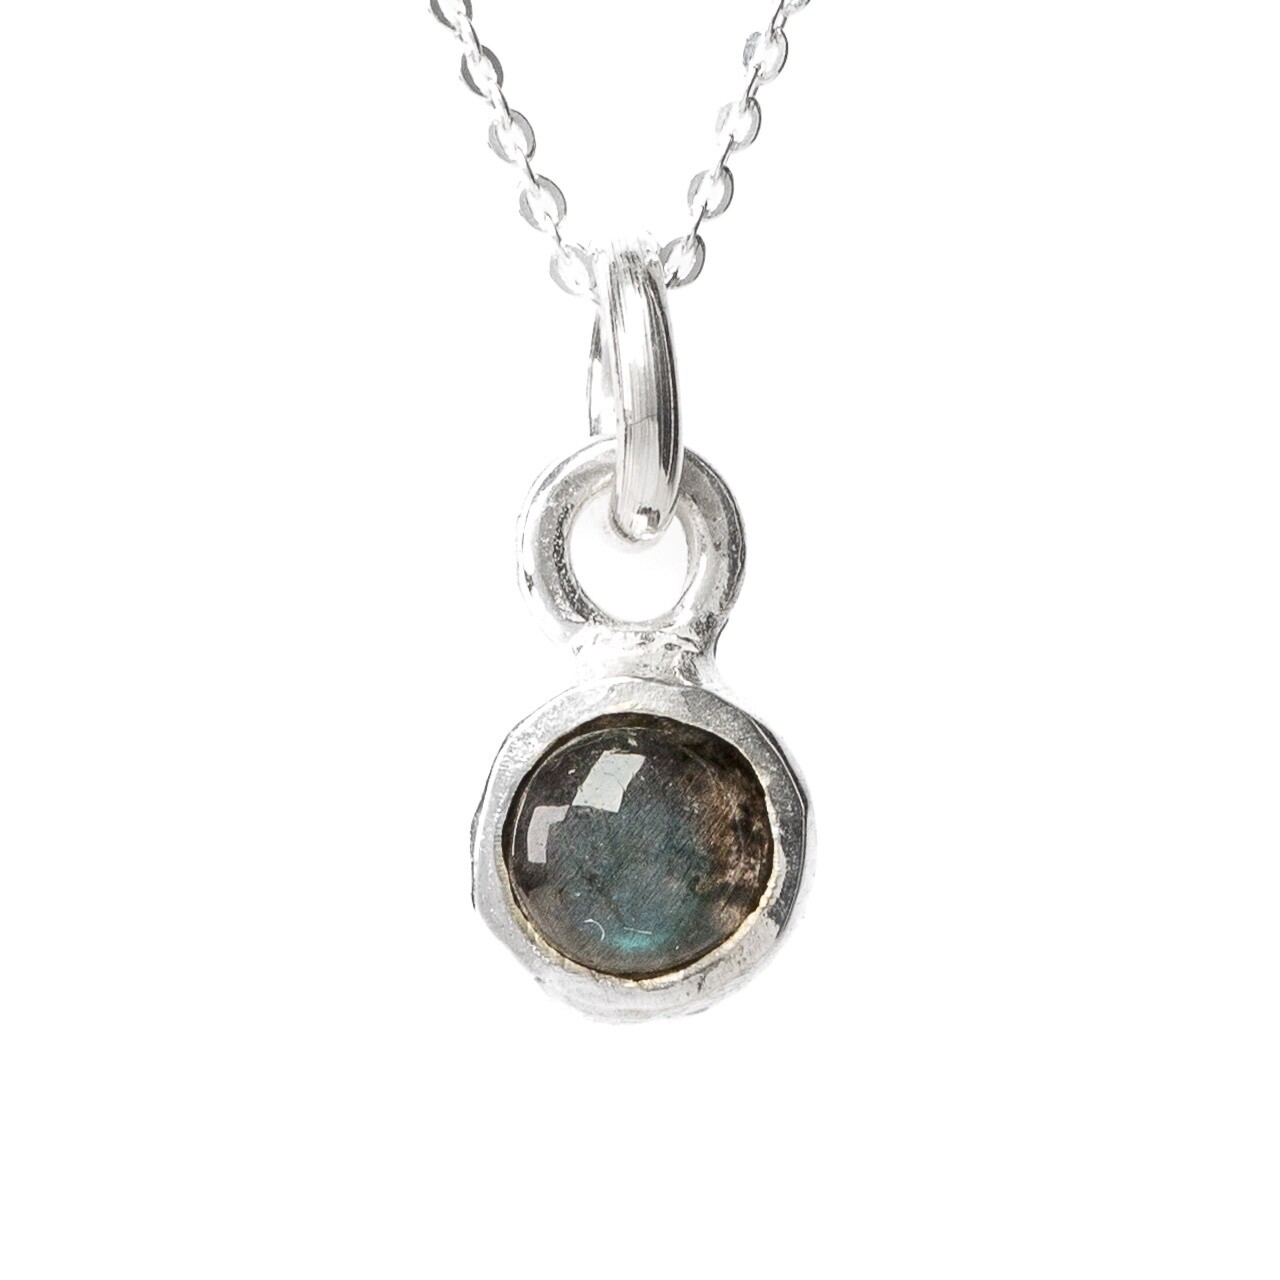 Labradorite and Silver Charm Pendant by Fi Mehra